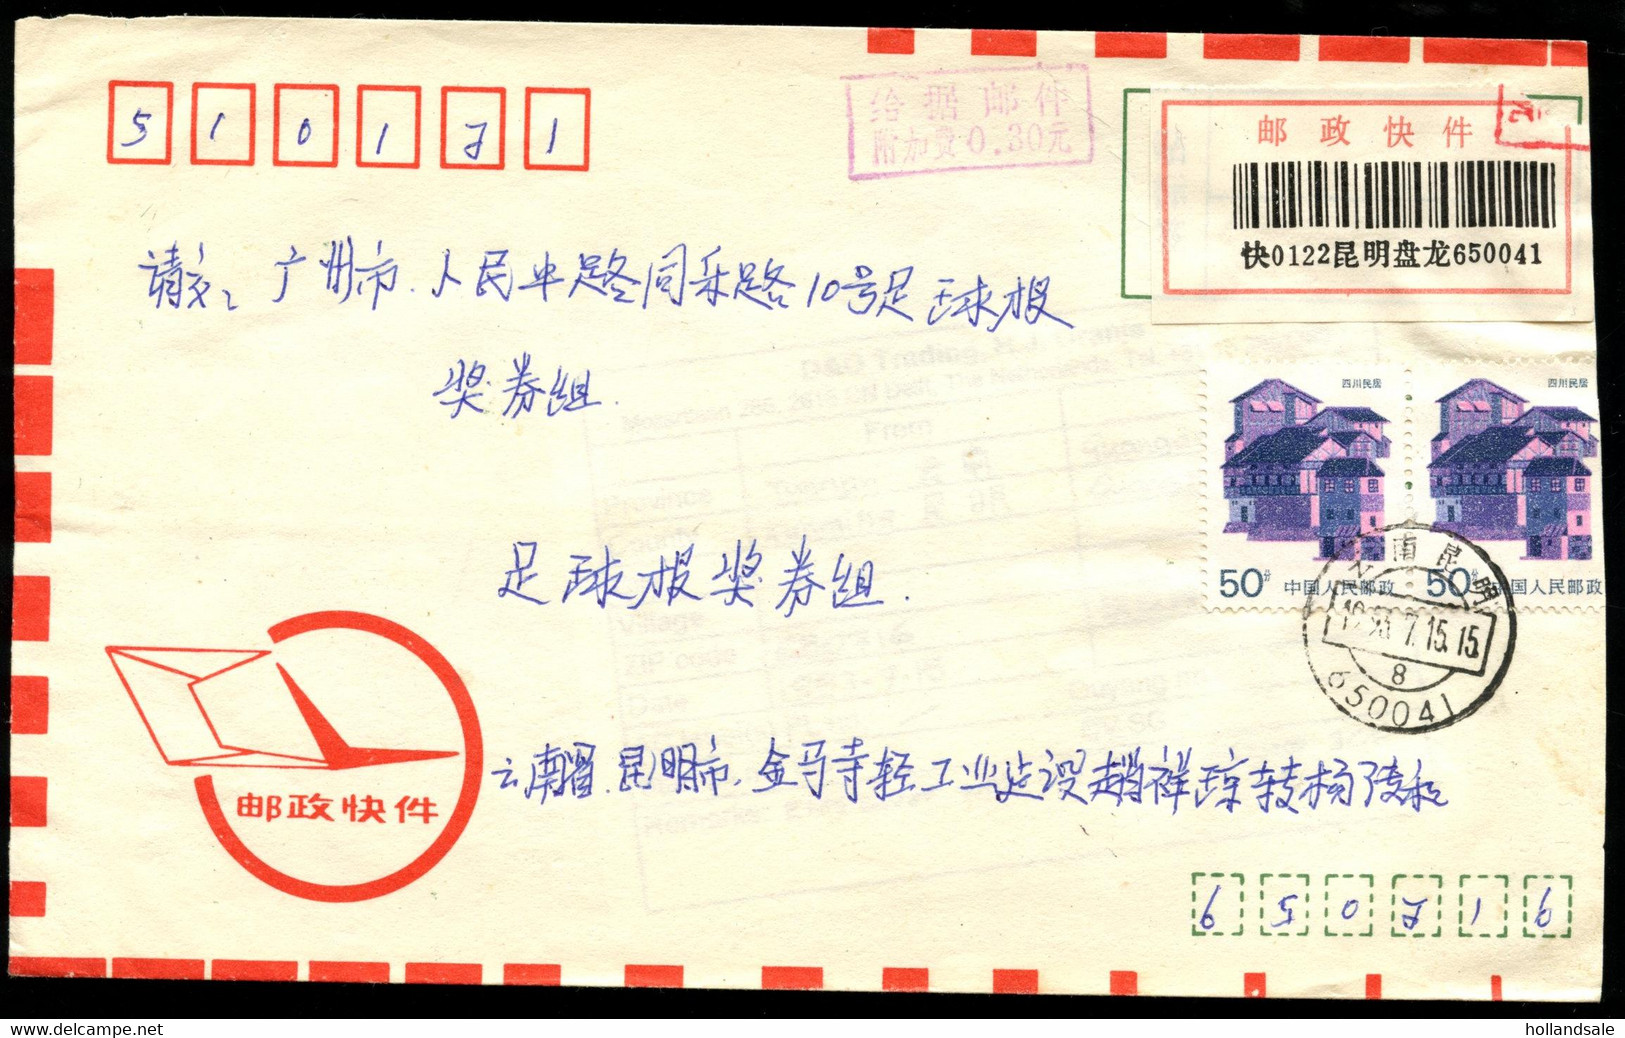 CHINA PRC / ADDED CHARGE LABELS -Letter Sent From Kunming To Guabgzhou. Red-violet AC Chop Of 30f - Portomarken